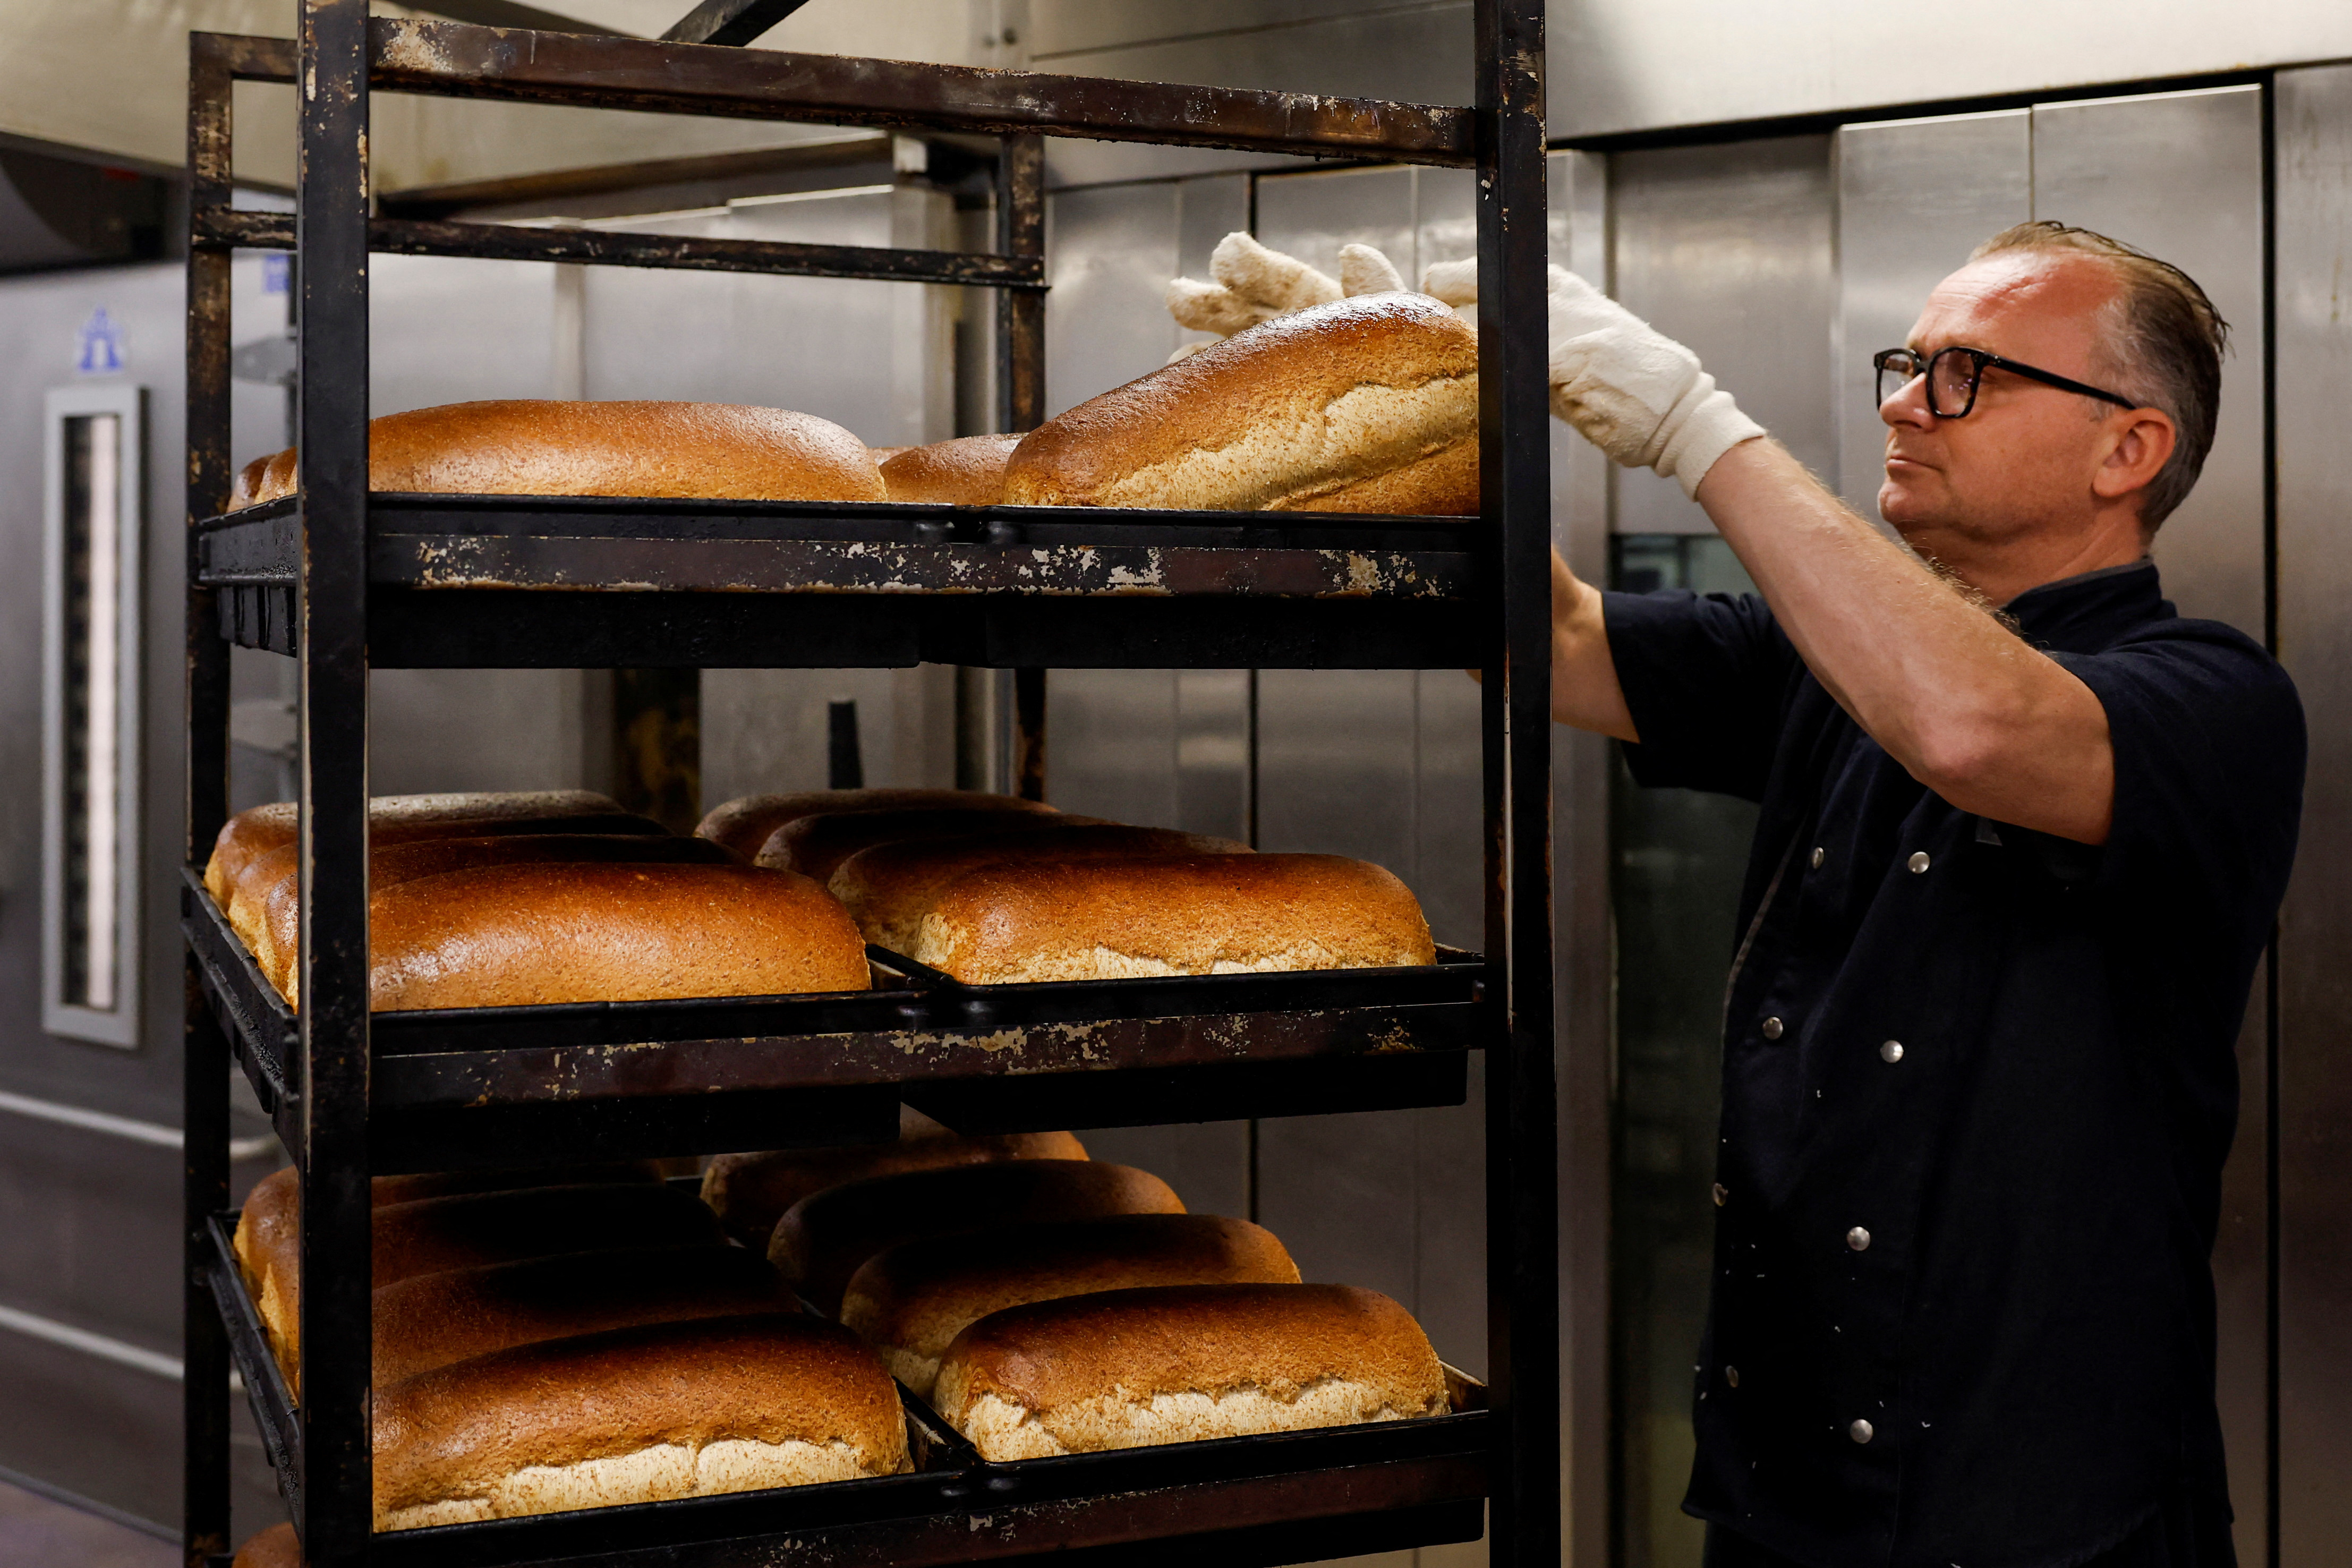 Owner Dennis Toebast takes the bread out of the oven at his bakery in Hoevelaken